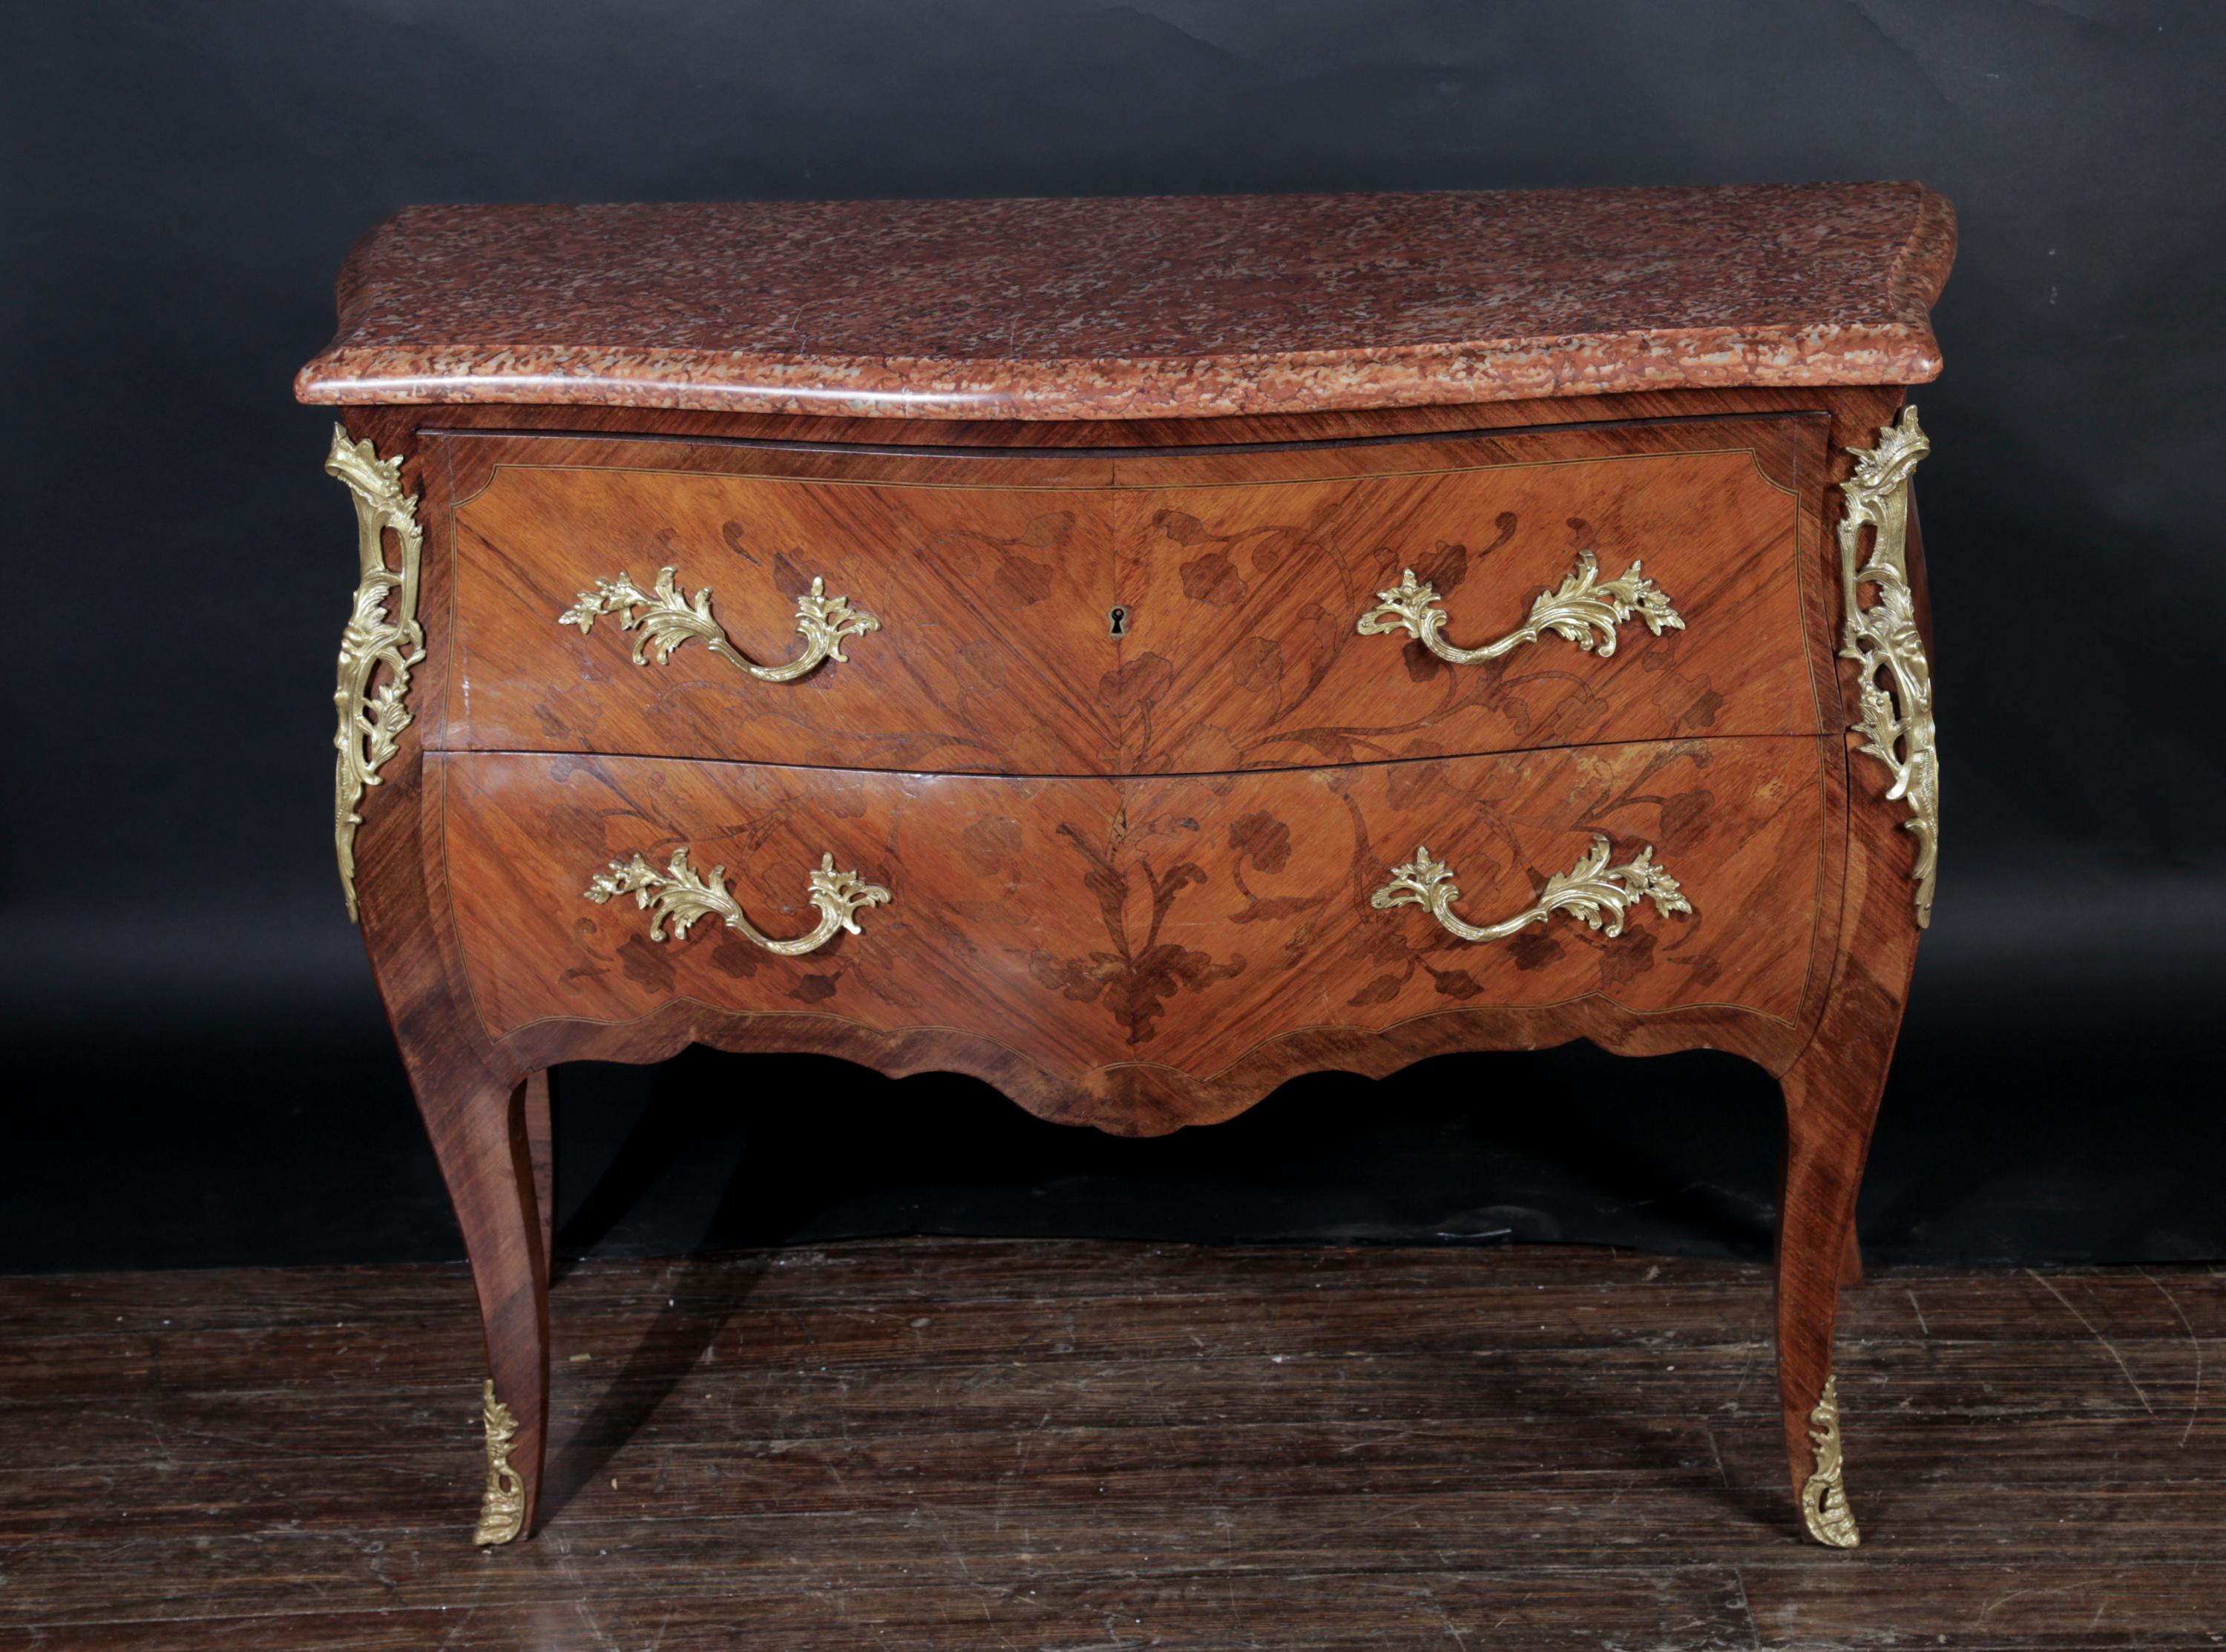 This beautiful Louis XV Bombe commode dates back to the 19th century and features elaborately inlaid marquetry work with a floral design that covers the two front drawers as well as both sides. The term bombe is a translation from the French word